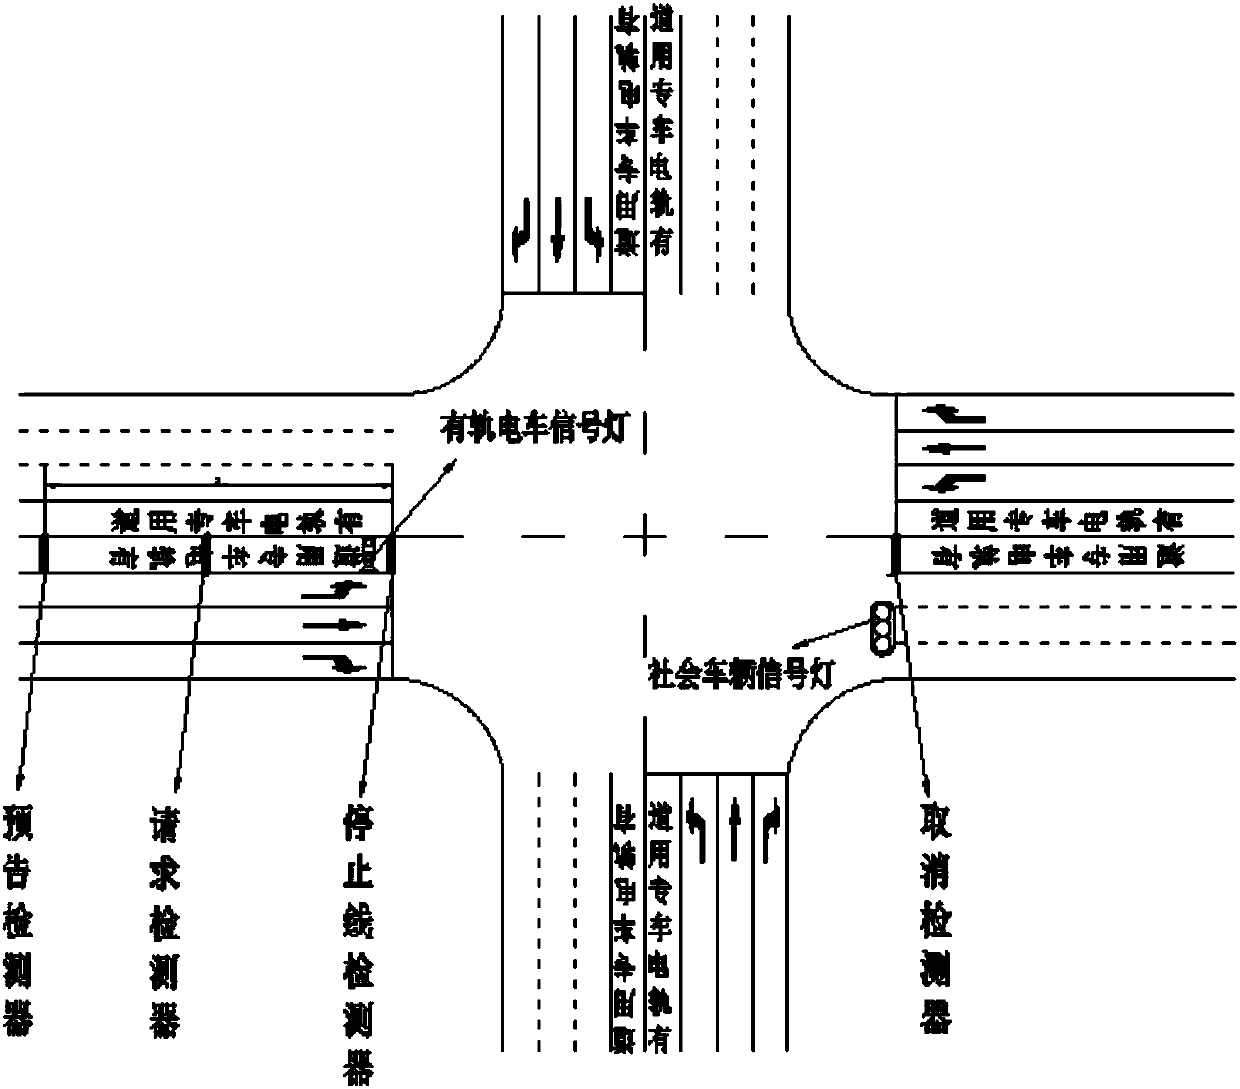 Cooperative priority control method of double tramcars at level crossing under non meeting state